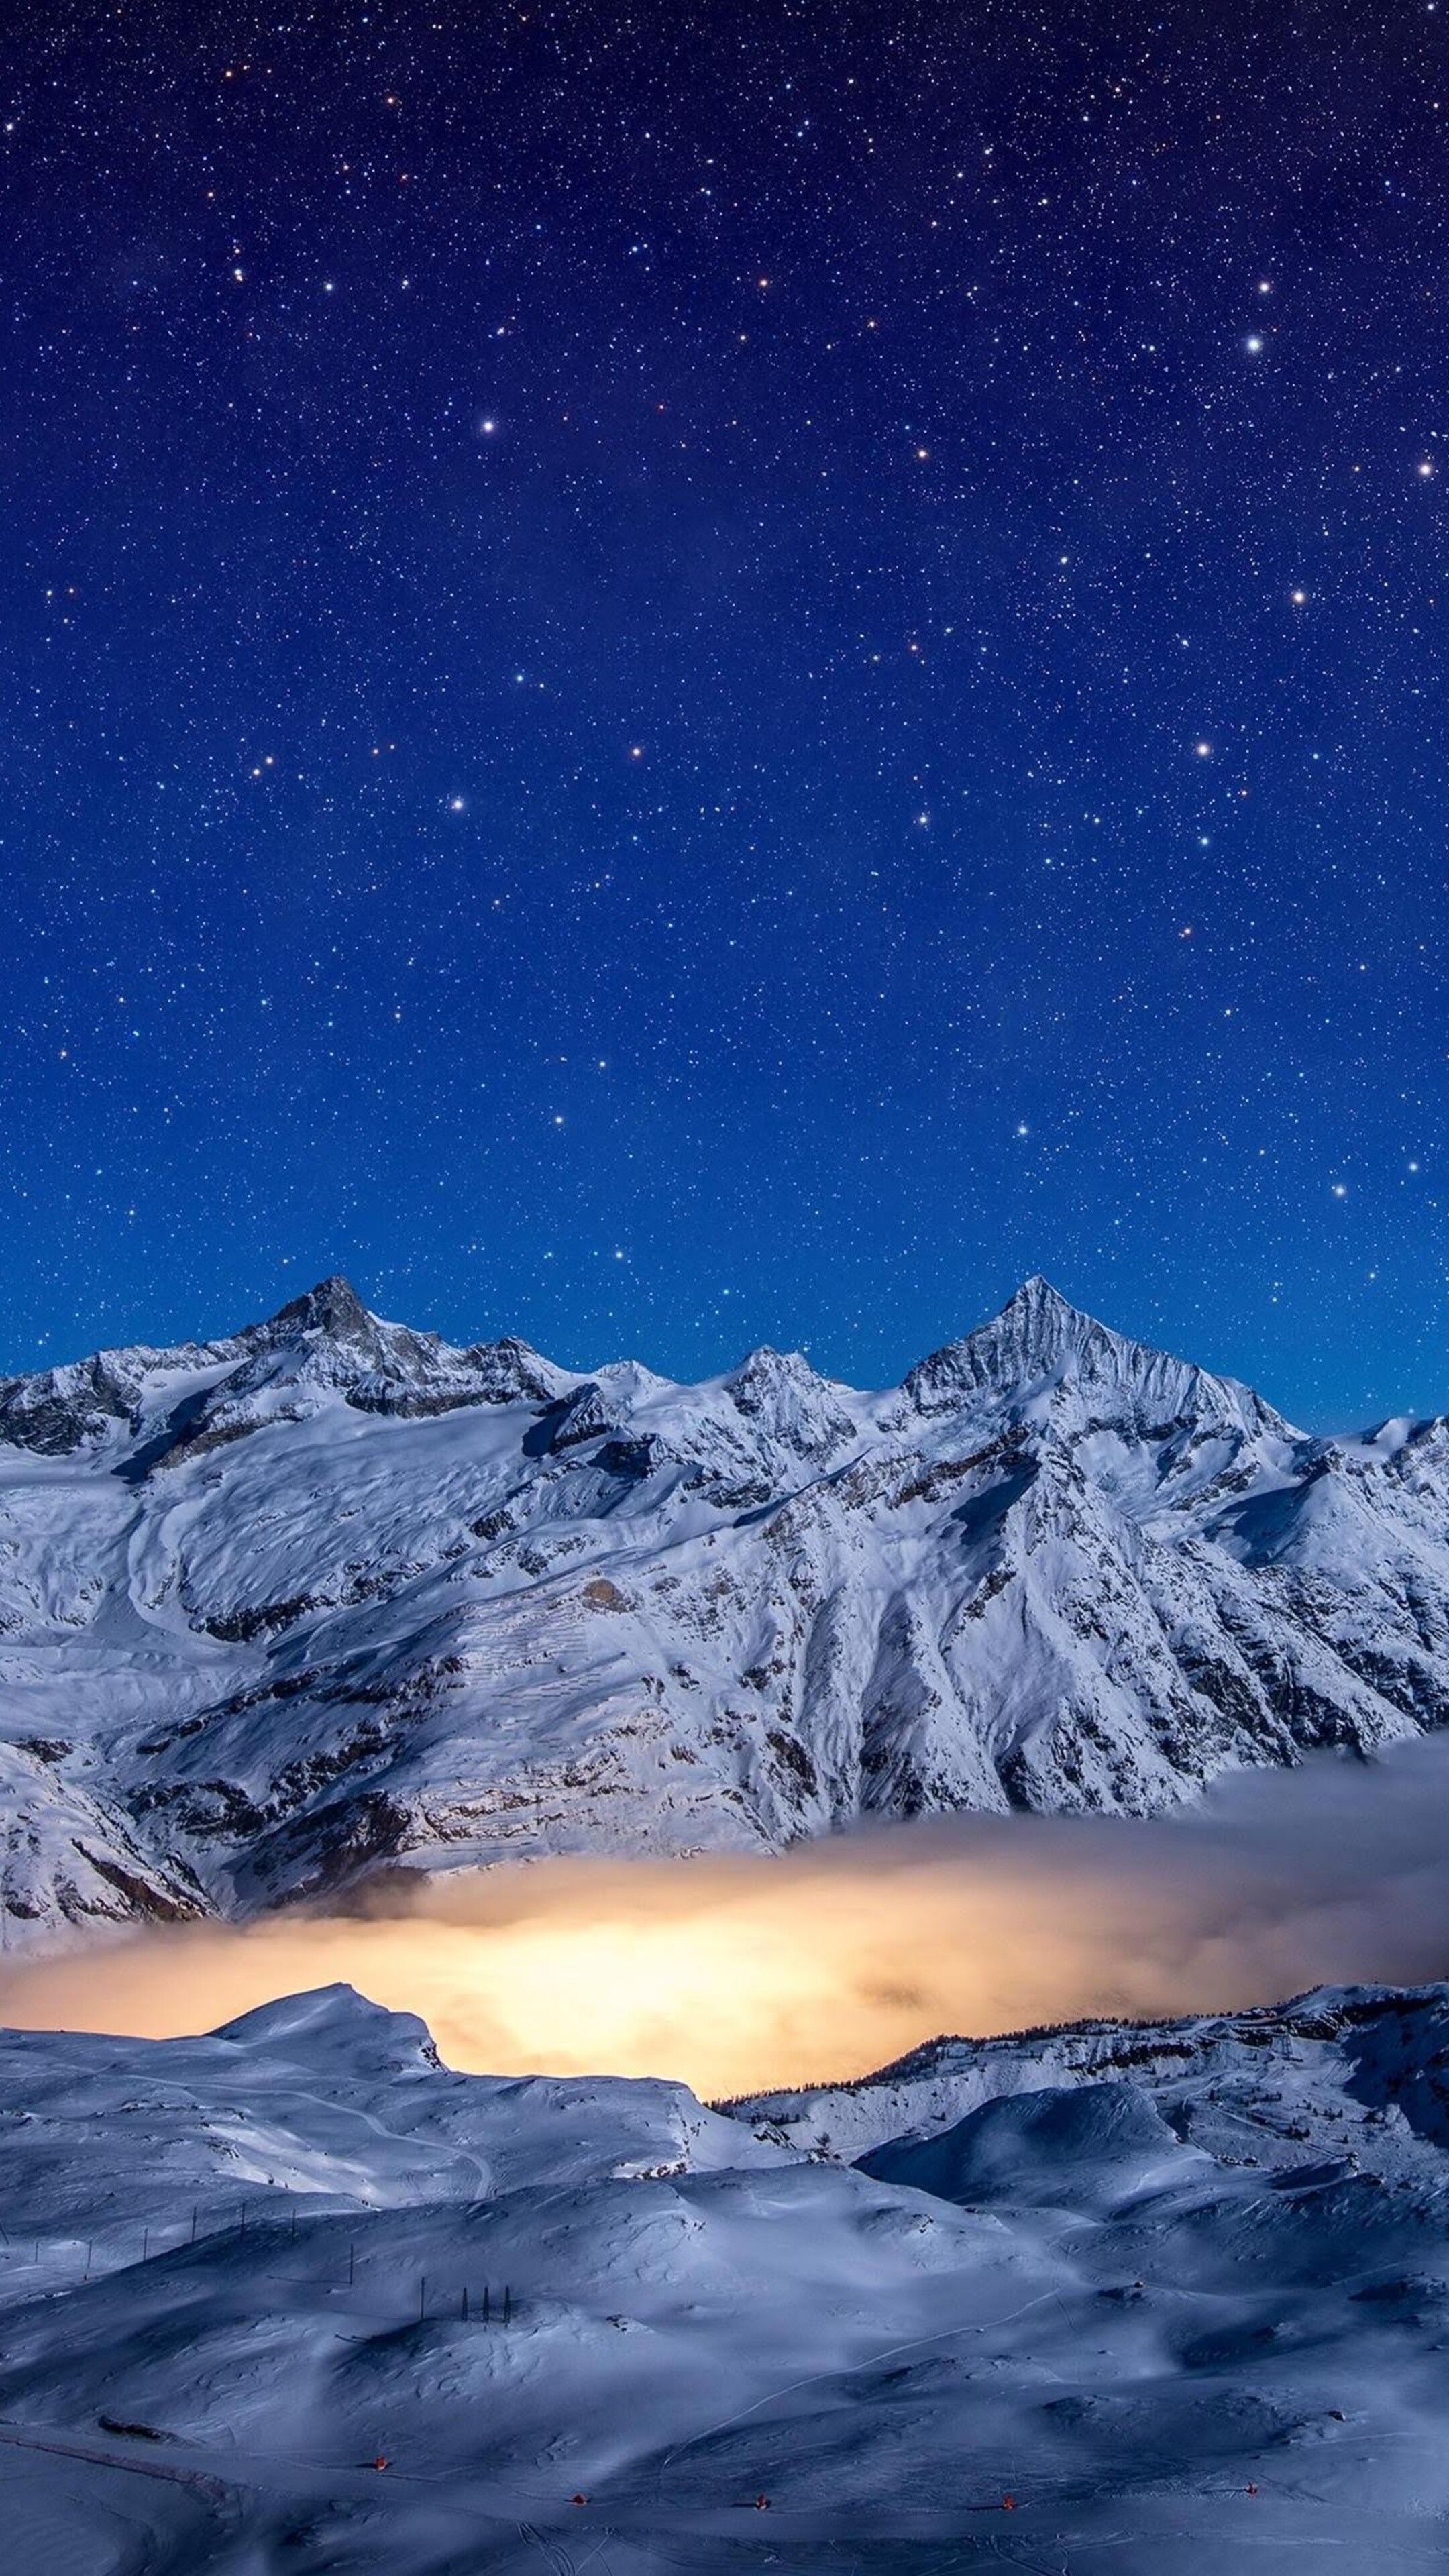 Glacier: Starry night, Snow covered mountains, A slowly moving mass of ice. 2160x3840 4K Wallpaper.